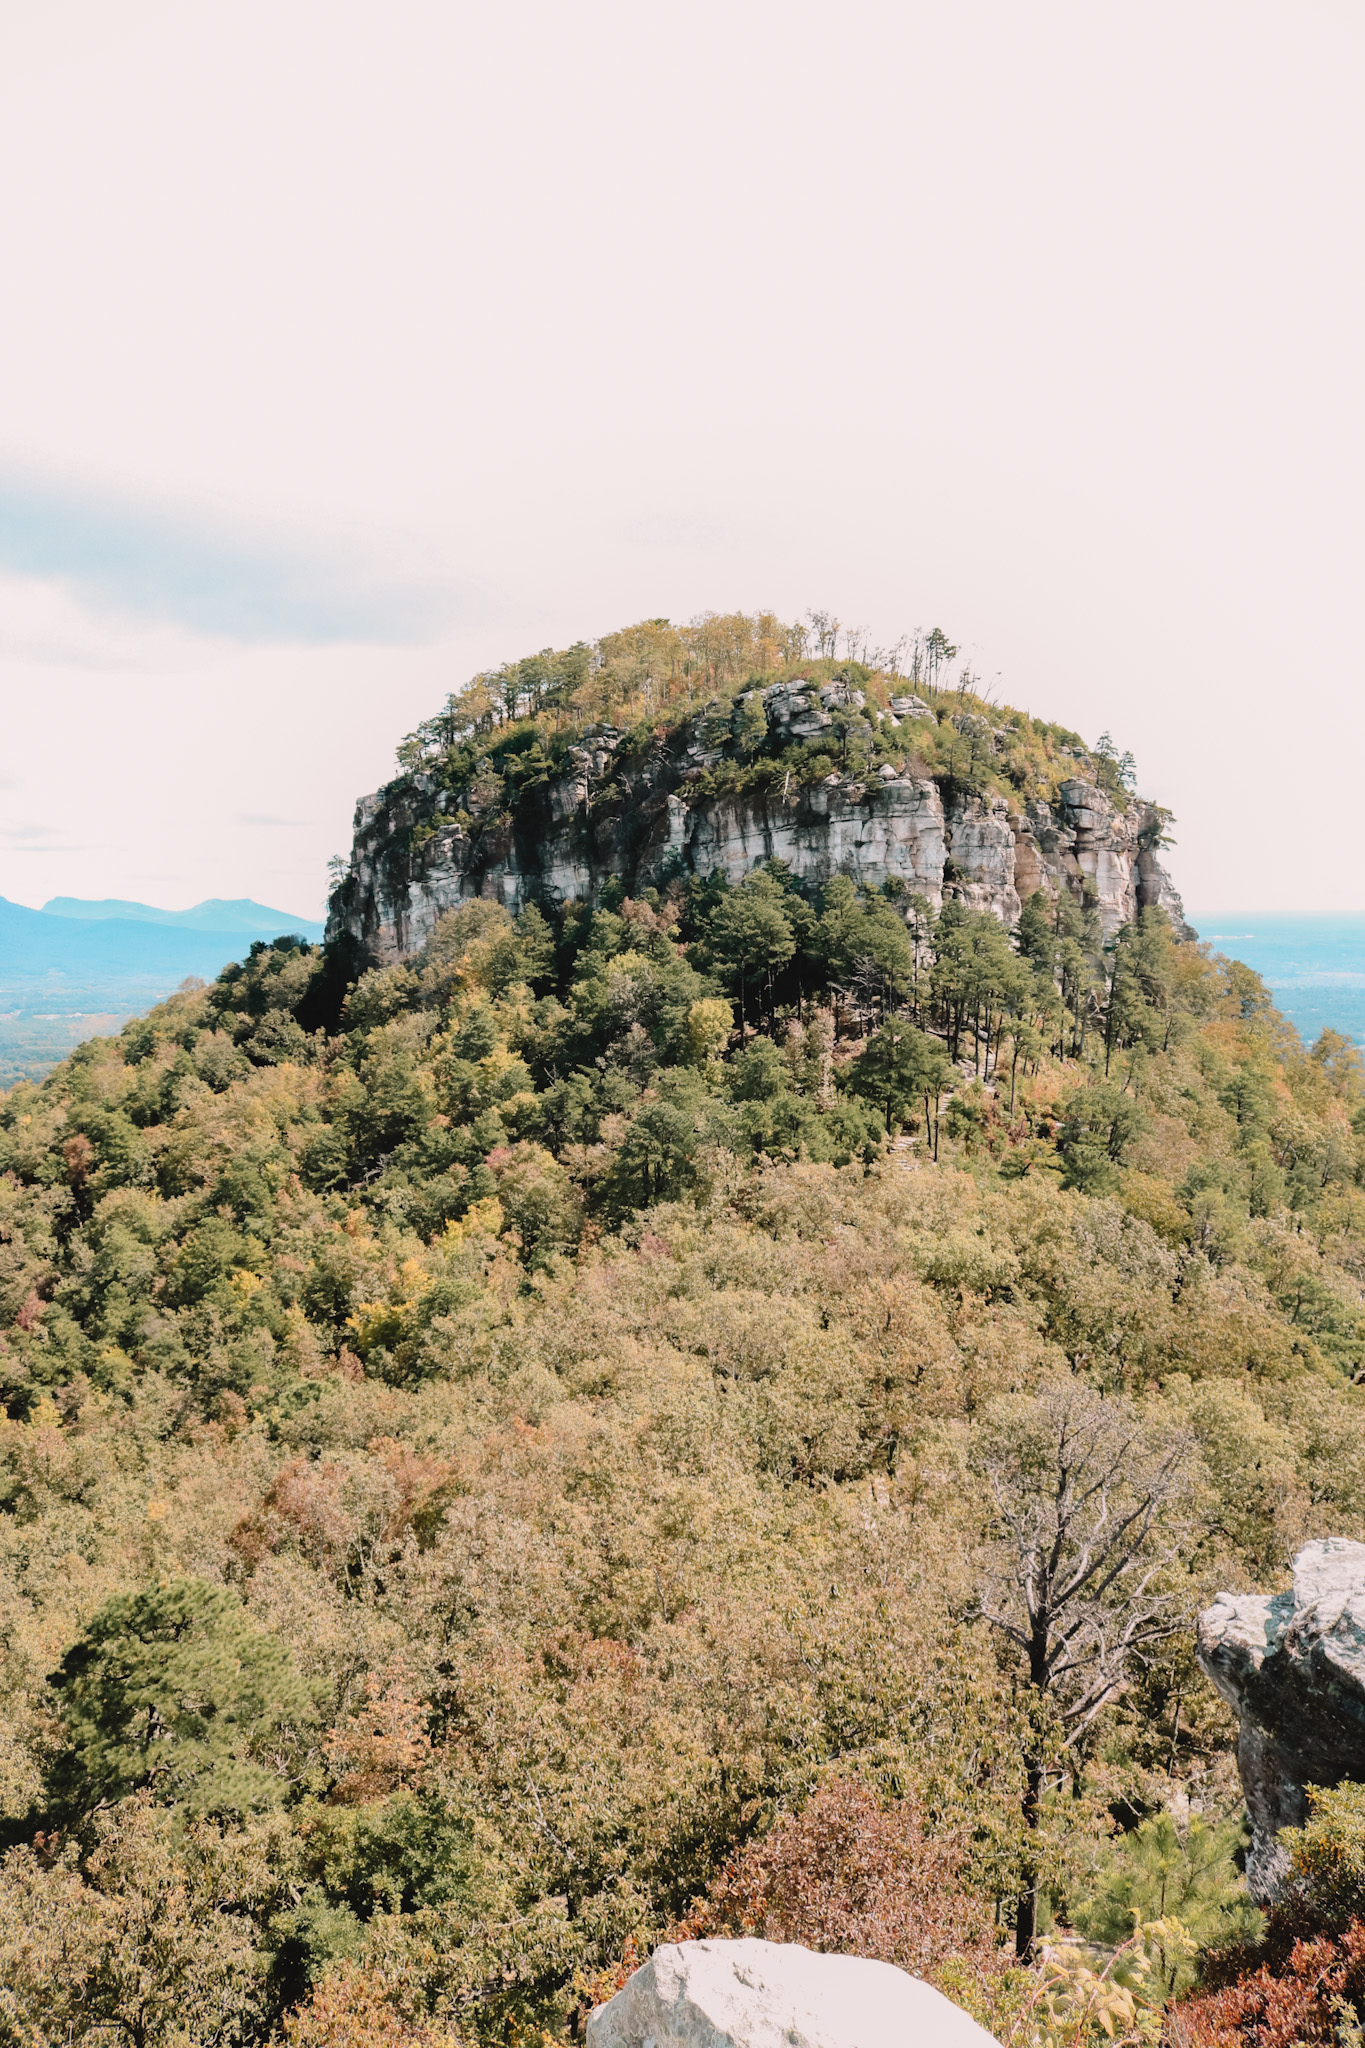 View from Little Scenic Overlook at Pilot Mountain State Park, North Carolina